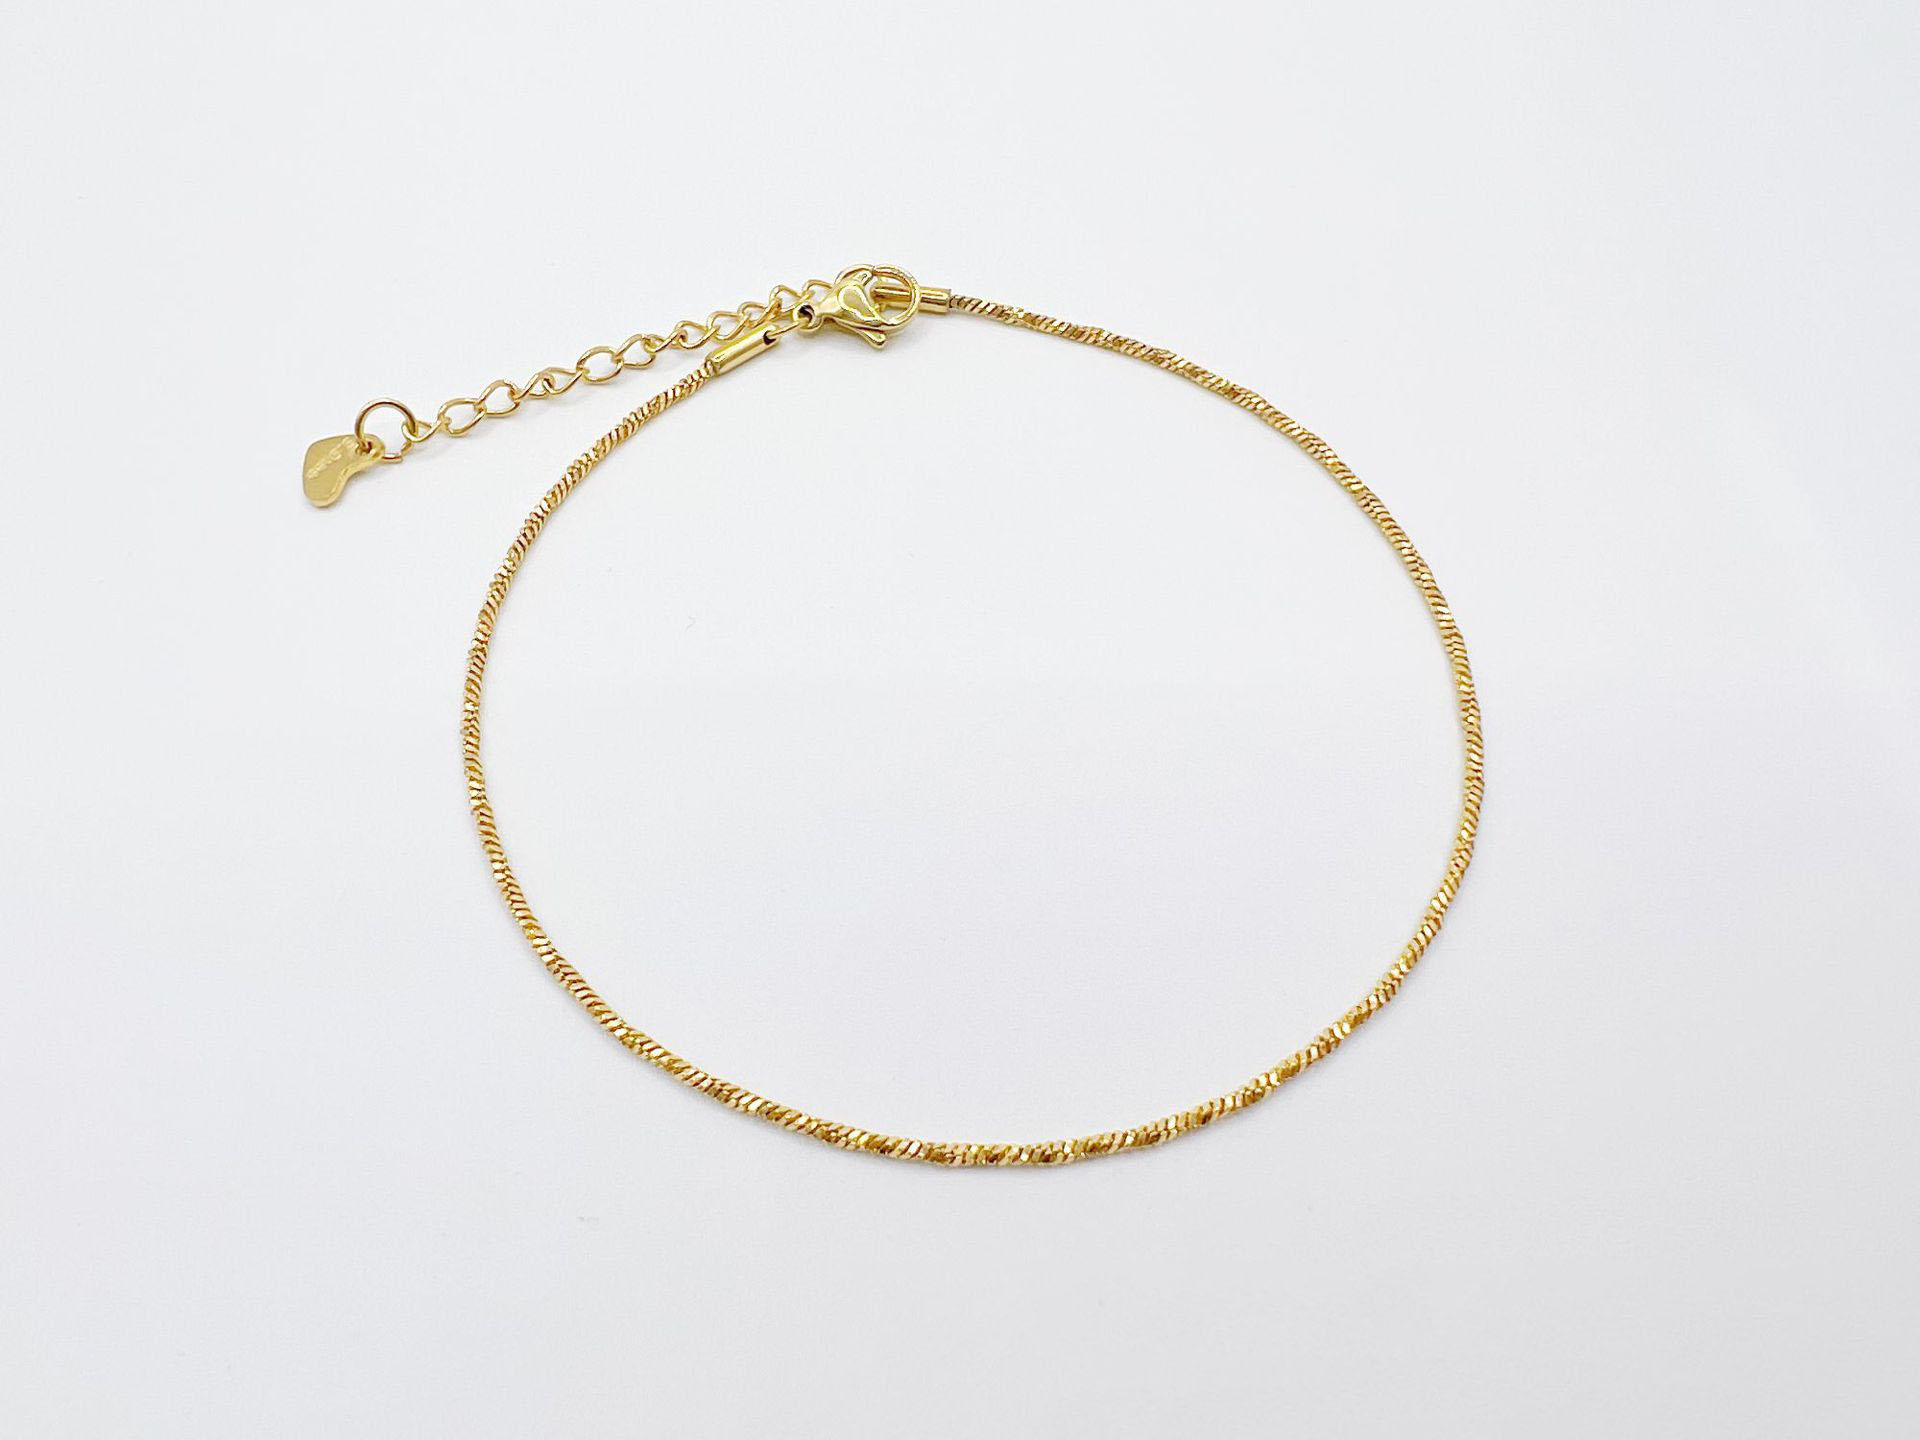 Twisted snake chain in gold